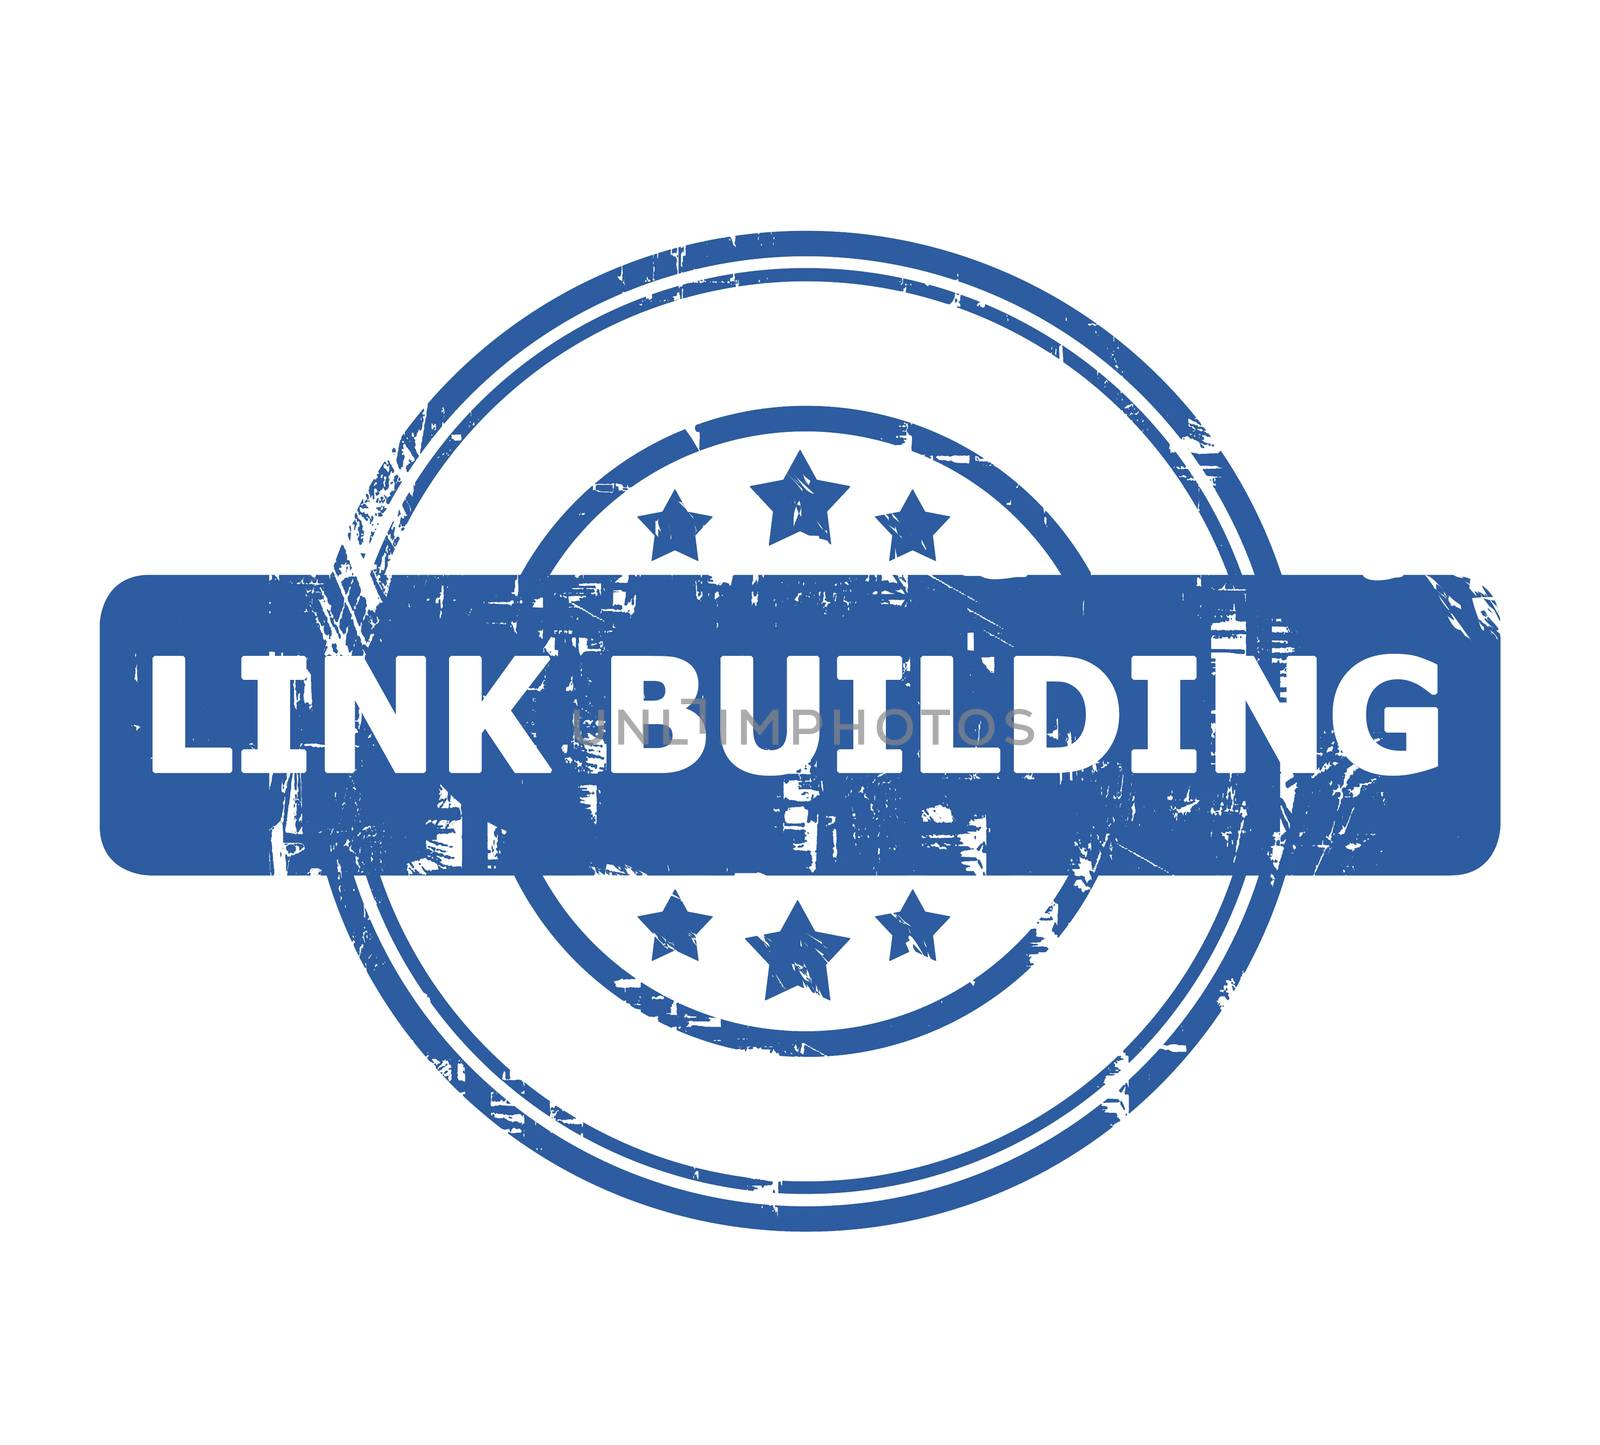 Link Building Stamp by speedfighter